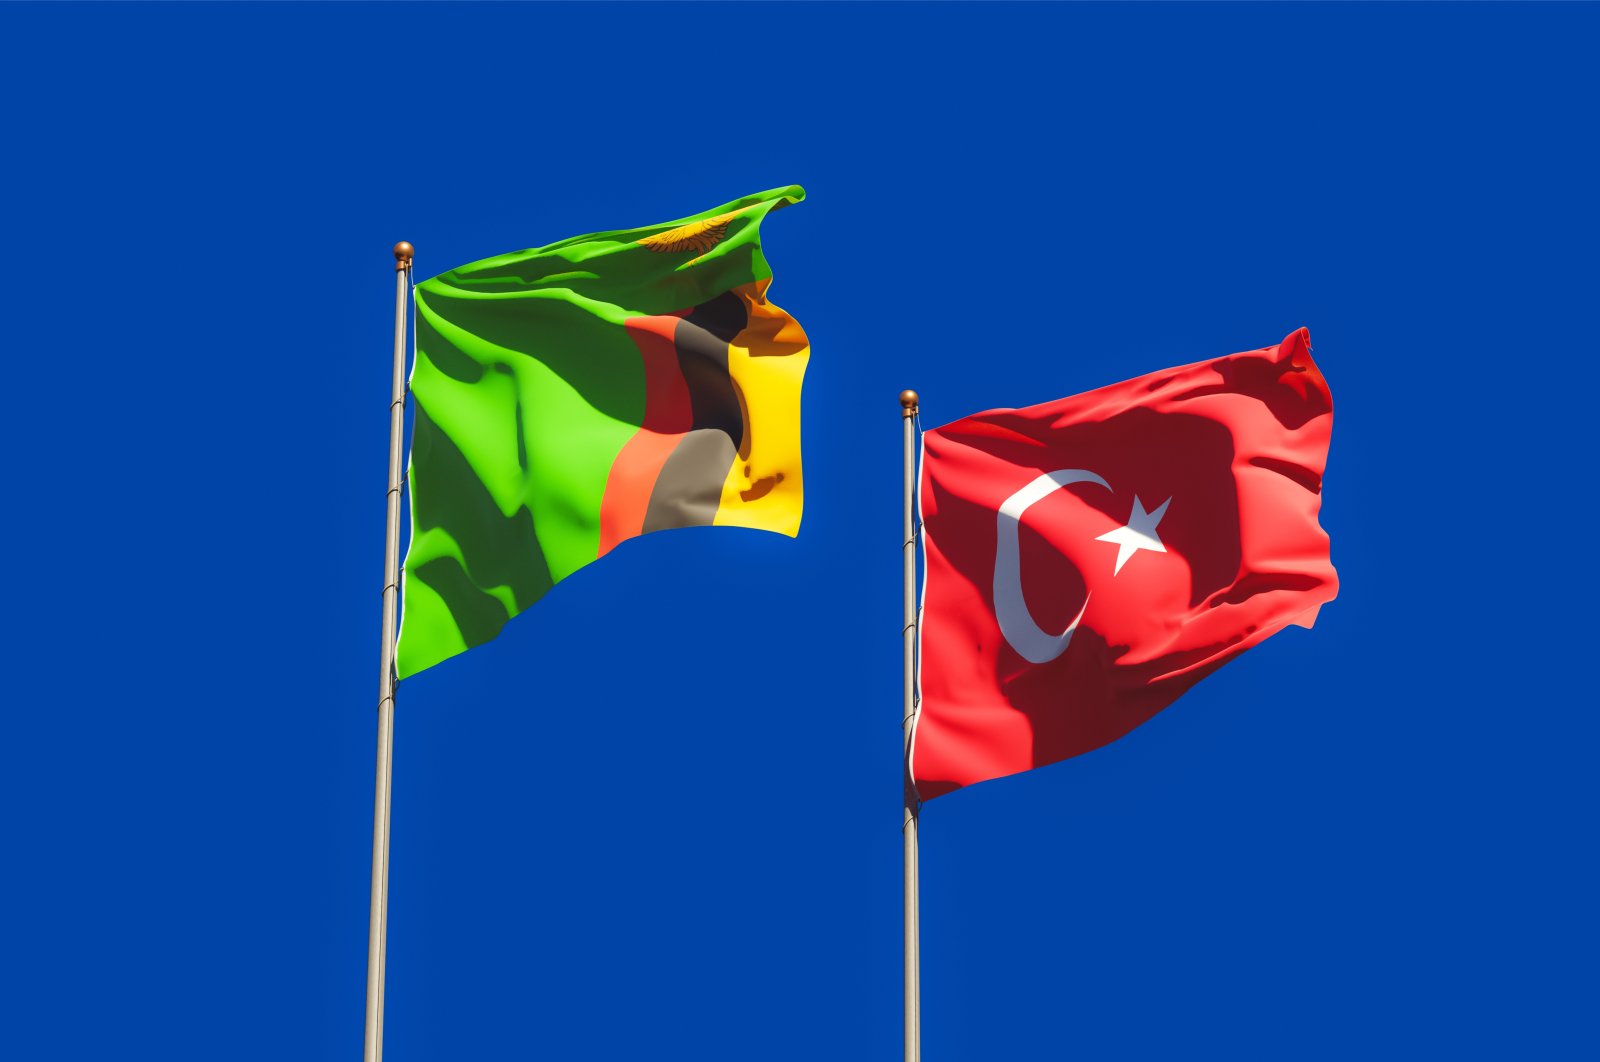 The flags of Zambia and Turkey. (Shutterstock)